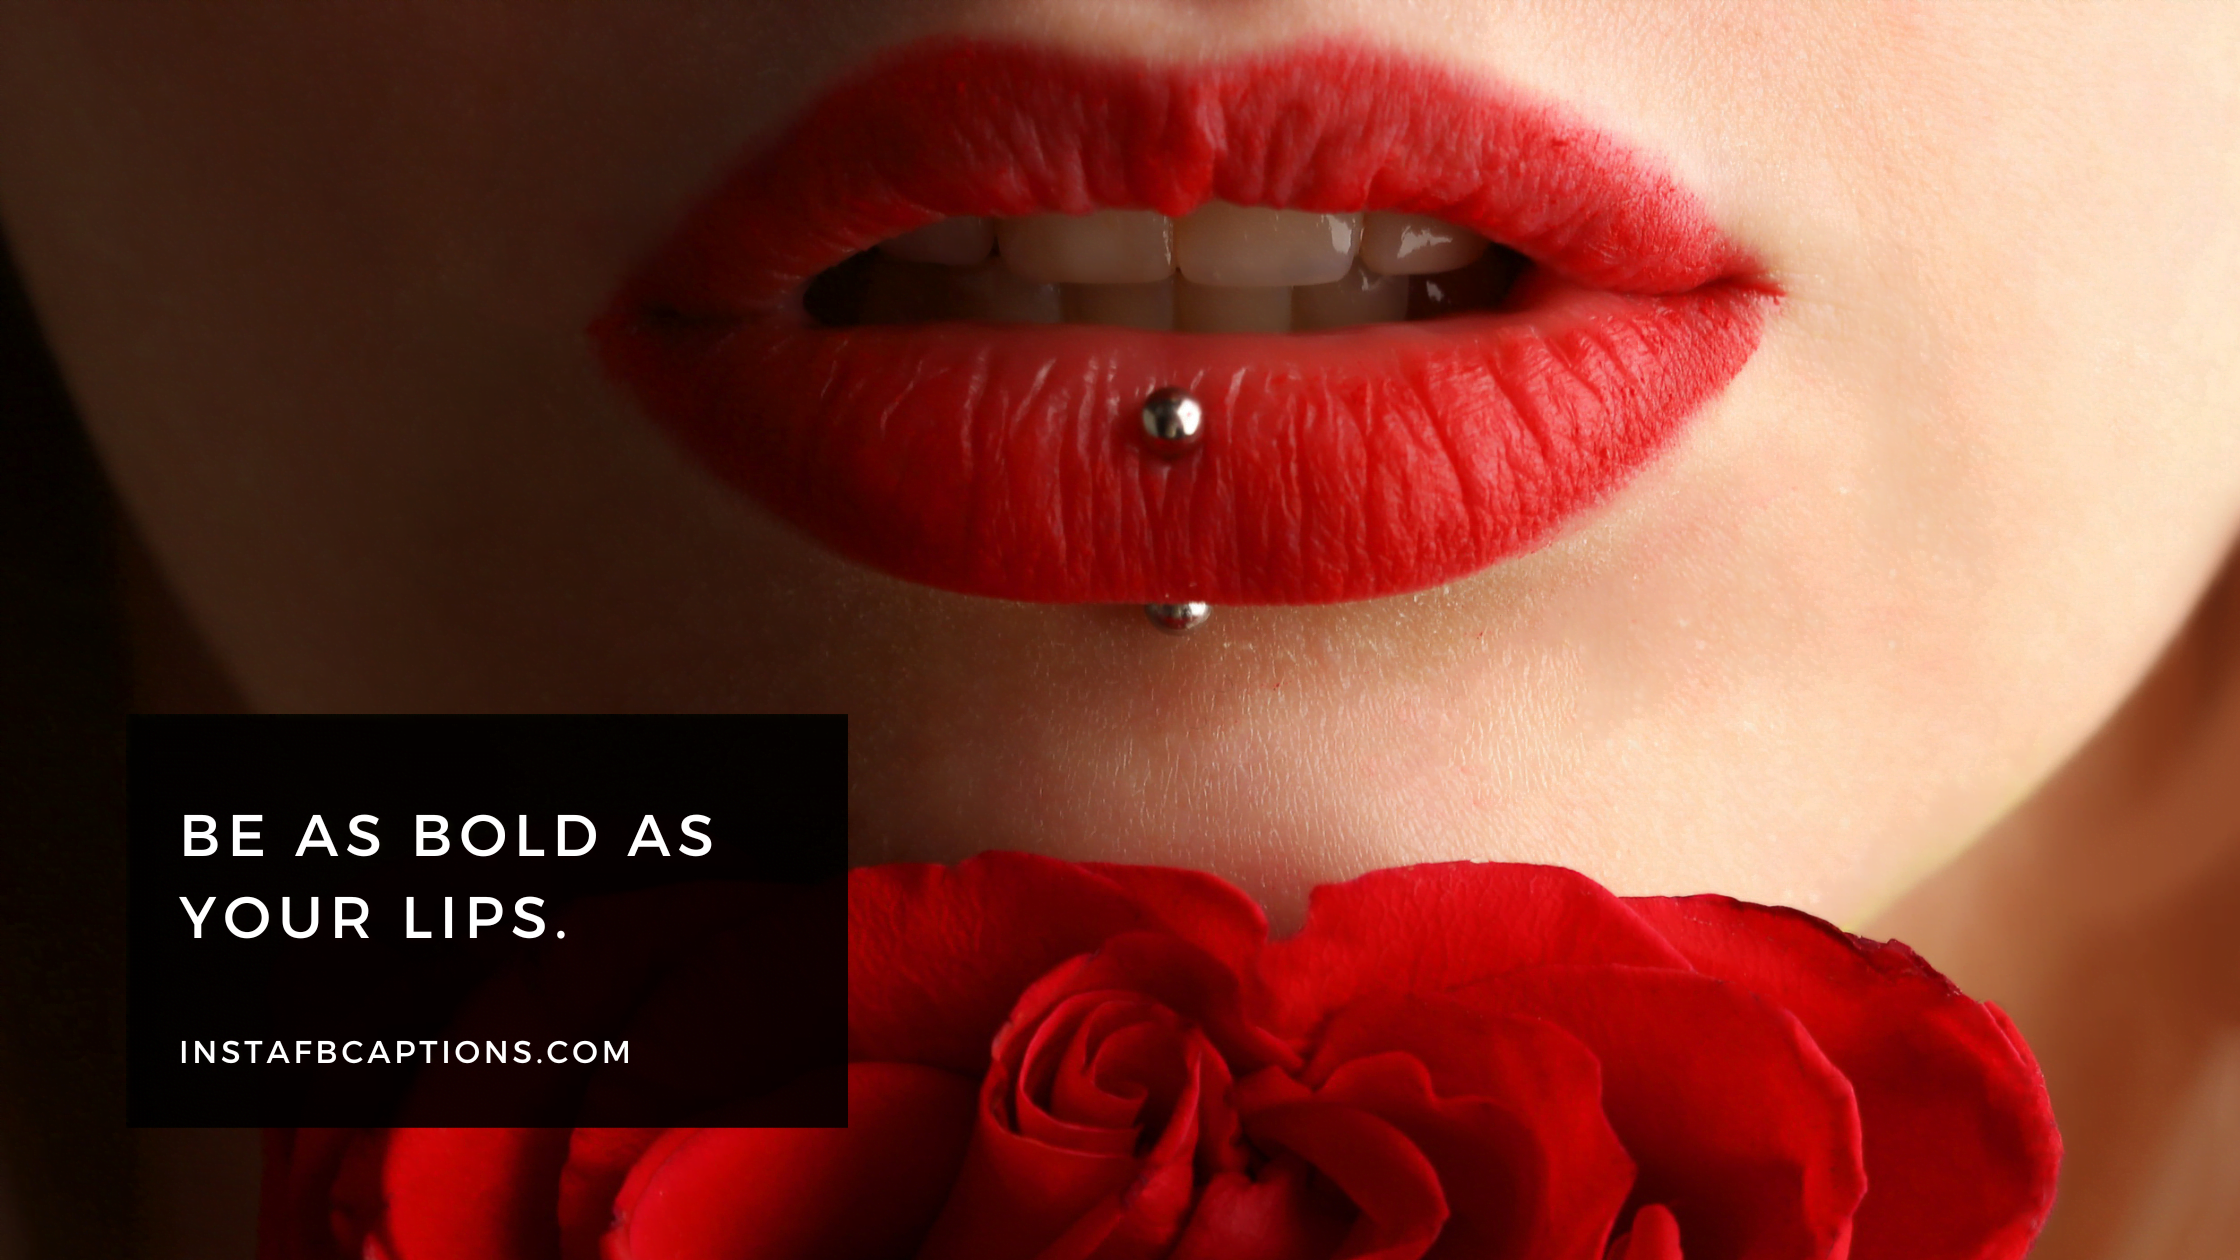 Wearing Red Lipstick Quotes  - Wearing Red Lipstick Quotes - Red Lipstick Captions Quotes for Instagram in 2023